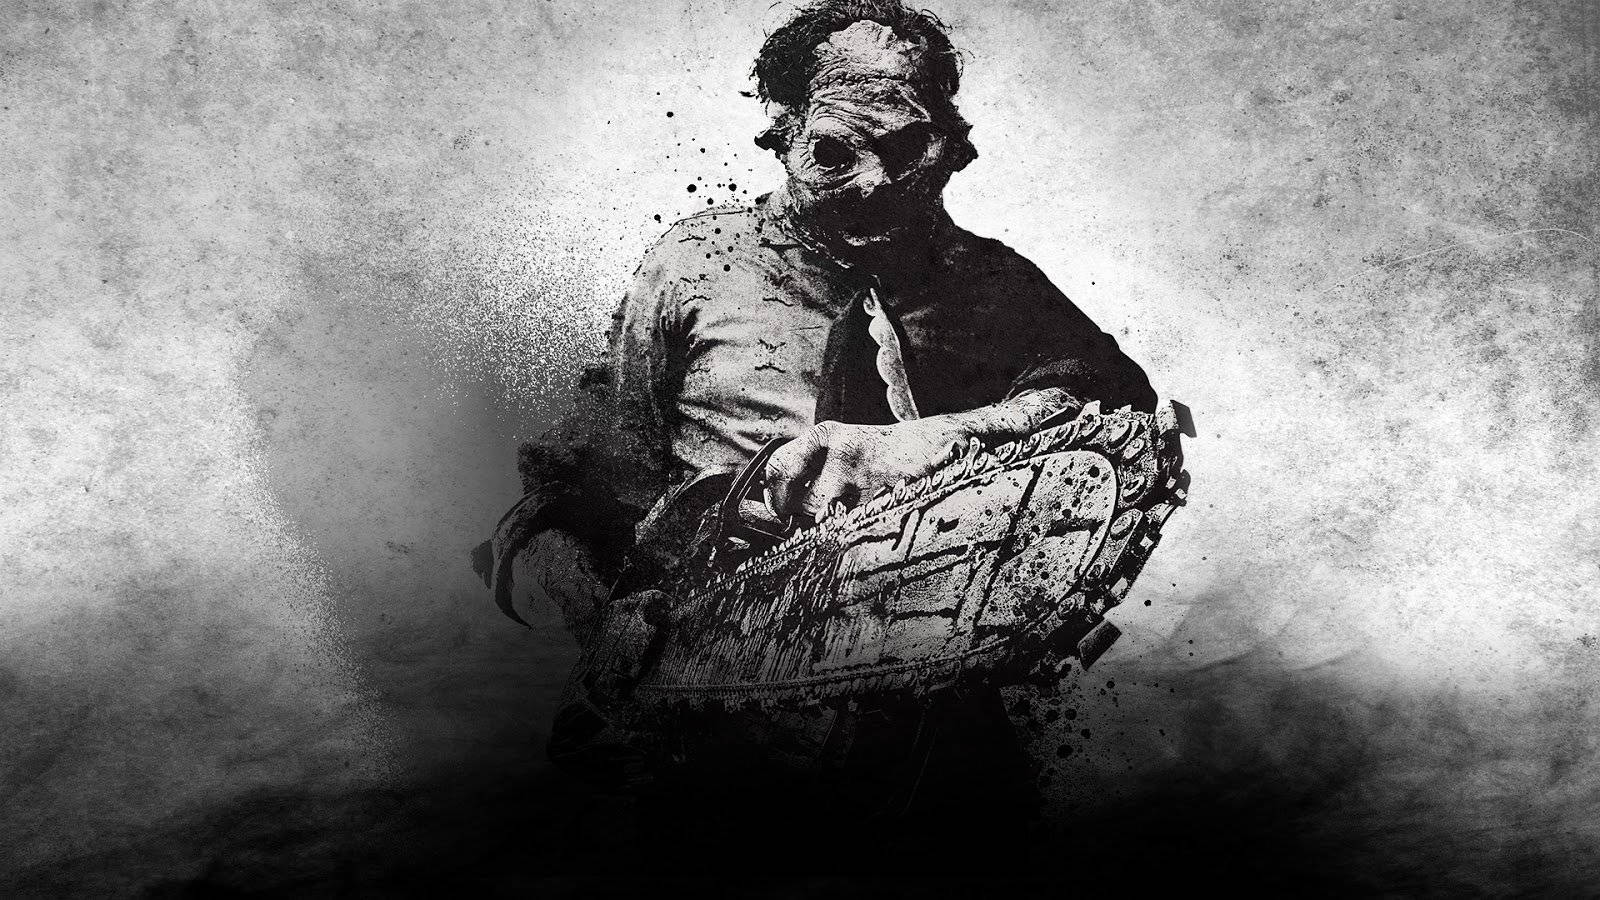 The Horrifying Look Of Leatherface In The Texas Chainsaw Massacre Wallpaper